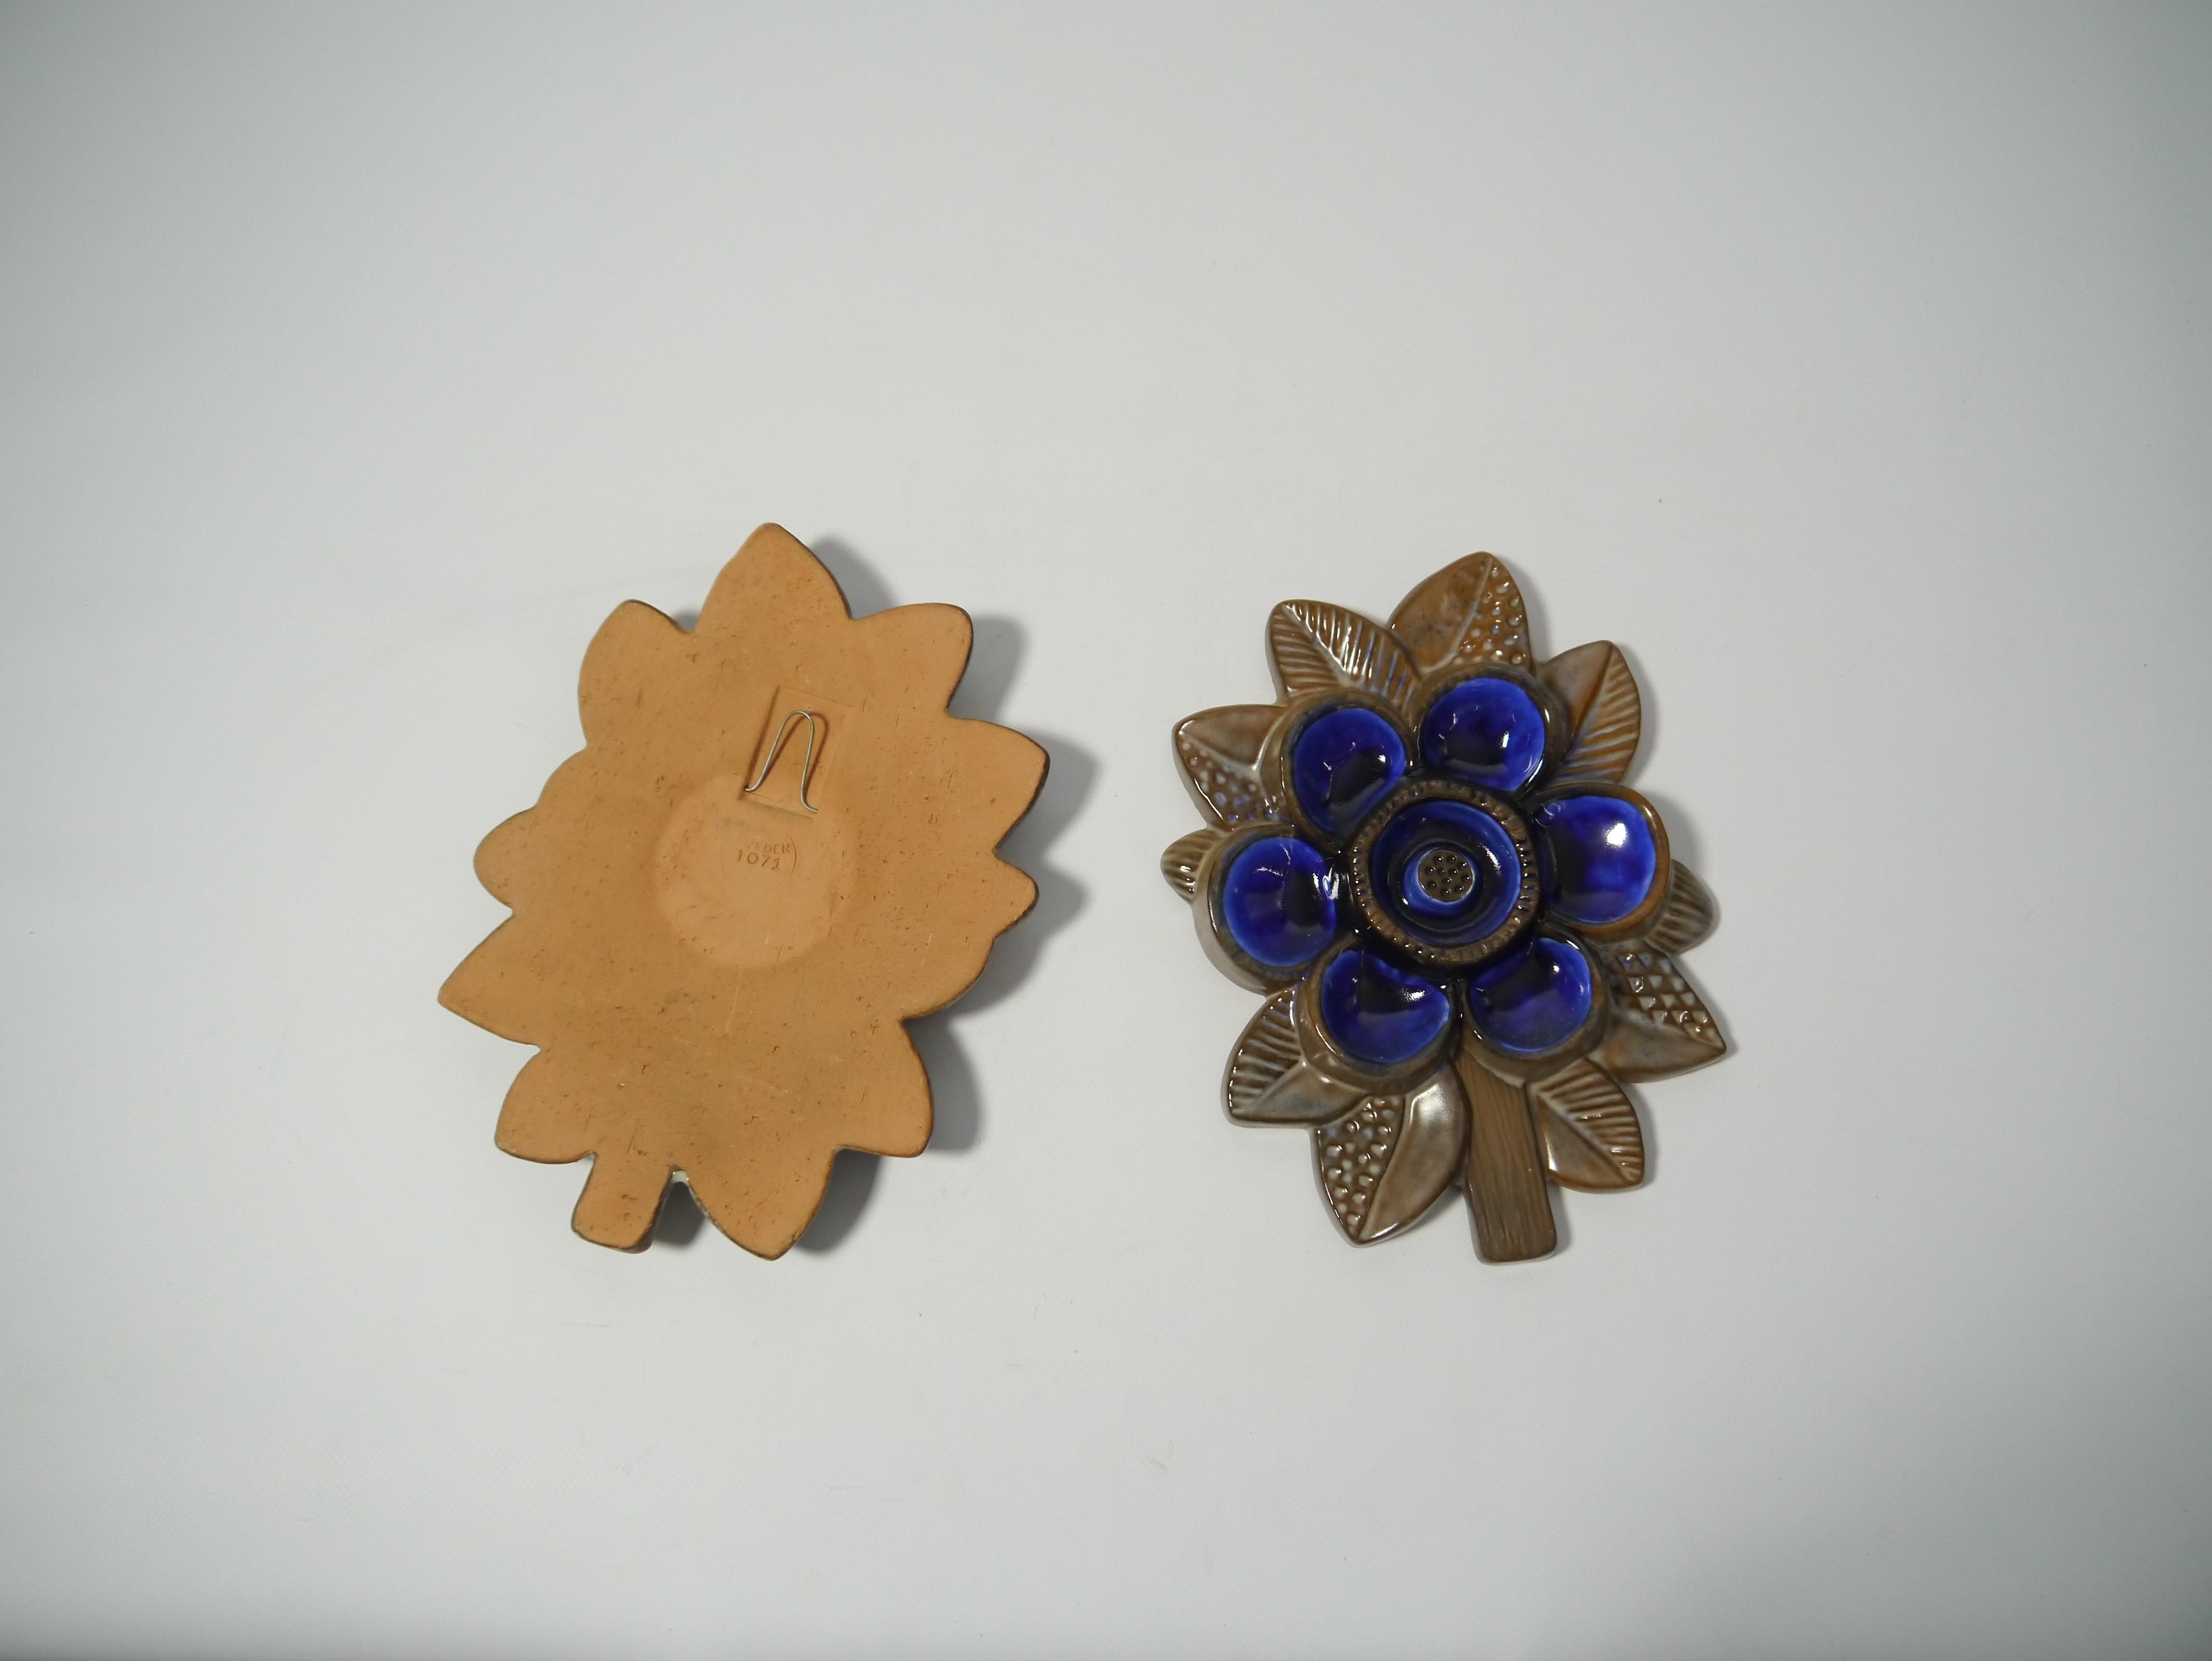 Scandinavian Modern Pair of Ceramic Blue Flower Wall Plaque by Irma Yourstone for Upsala Ekeby